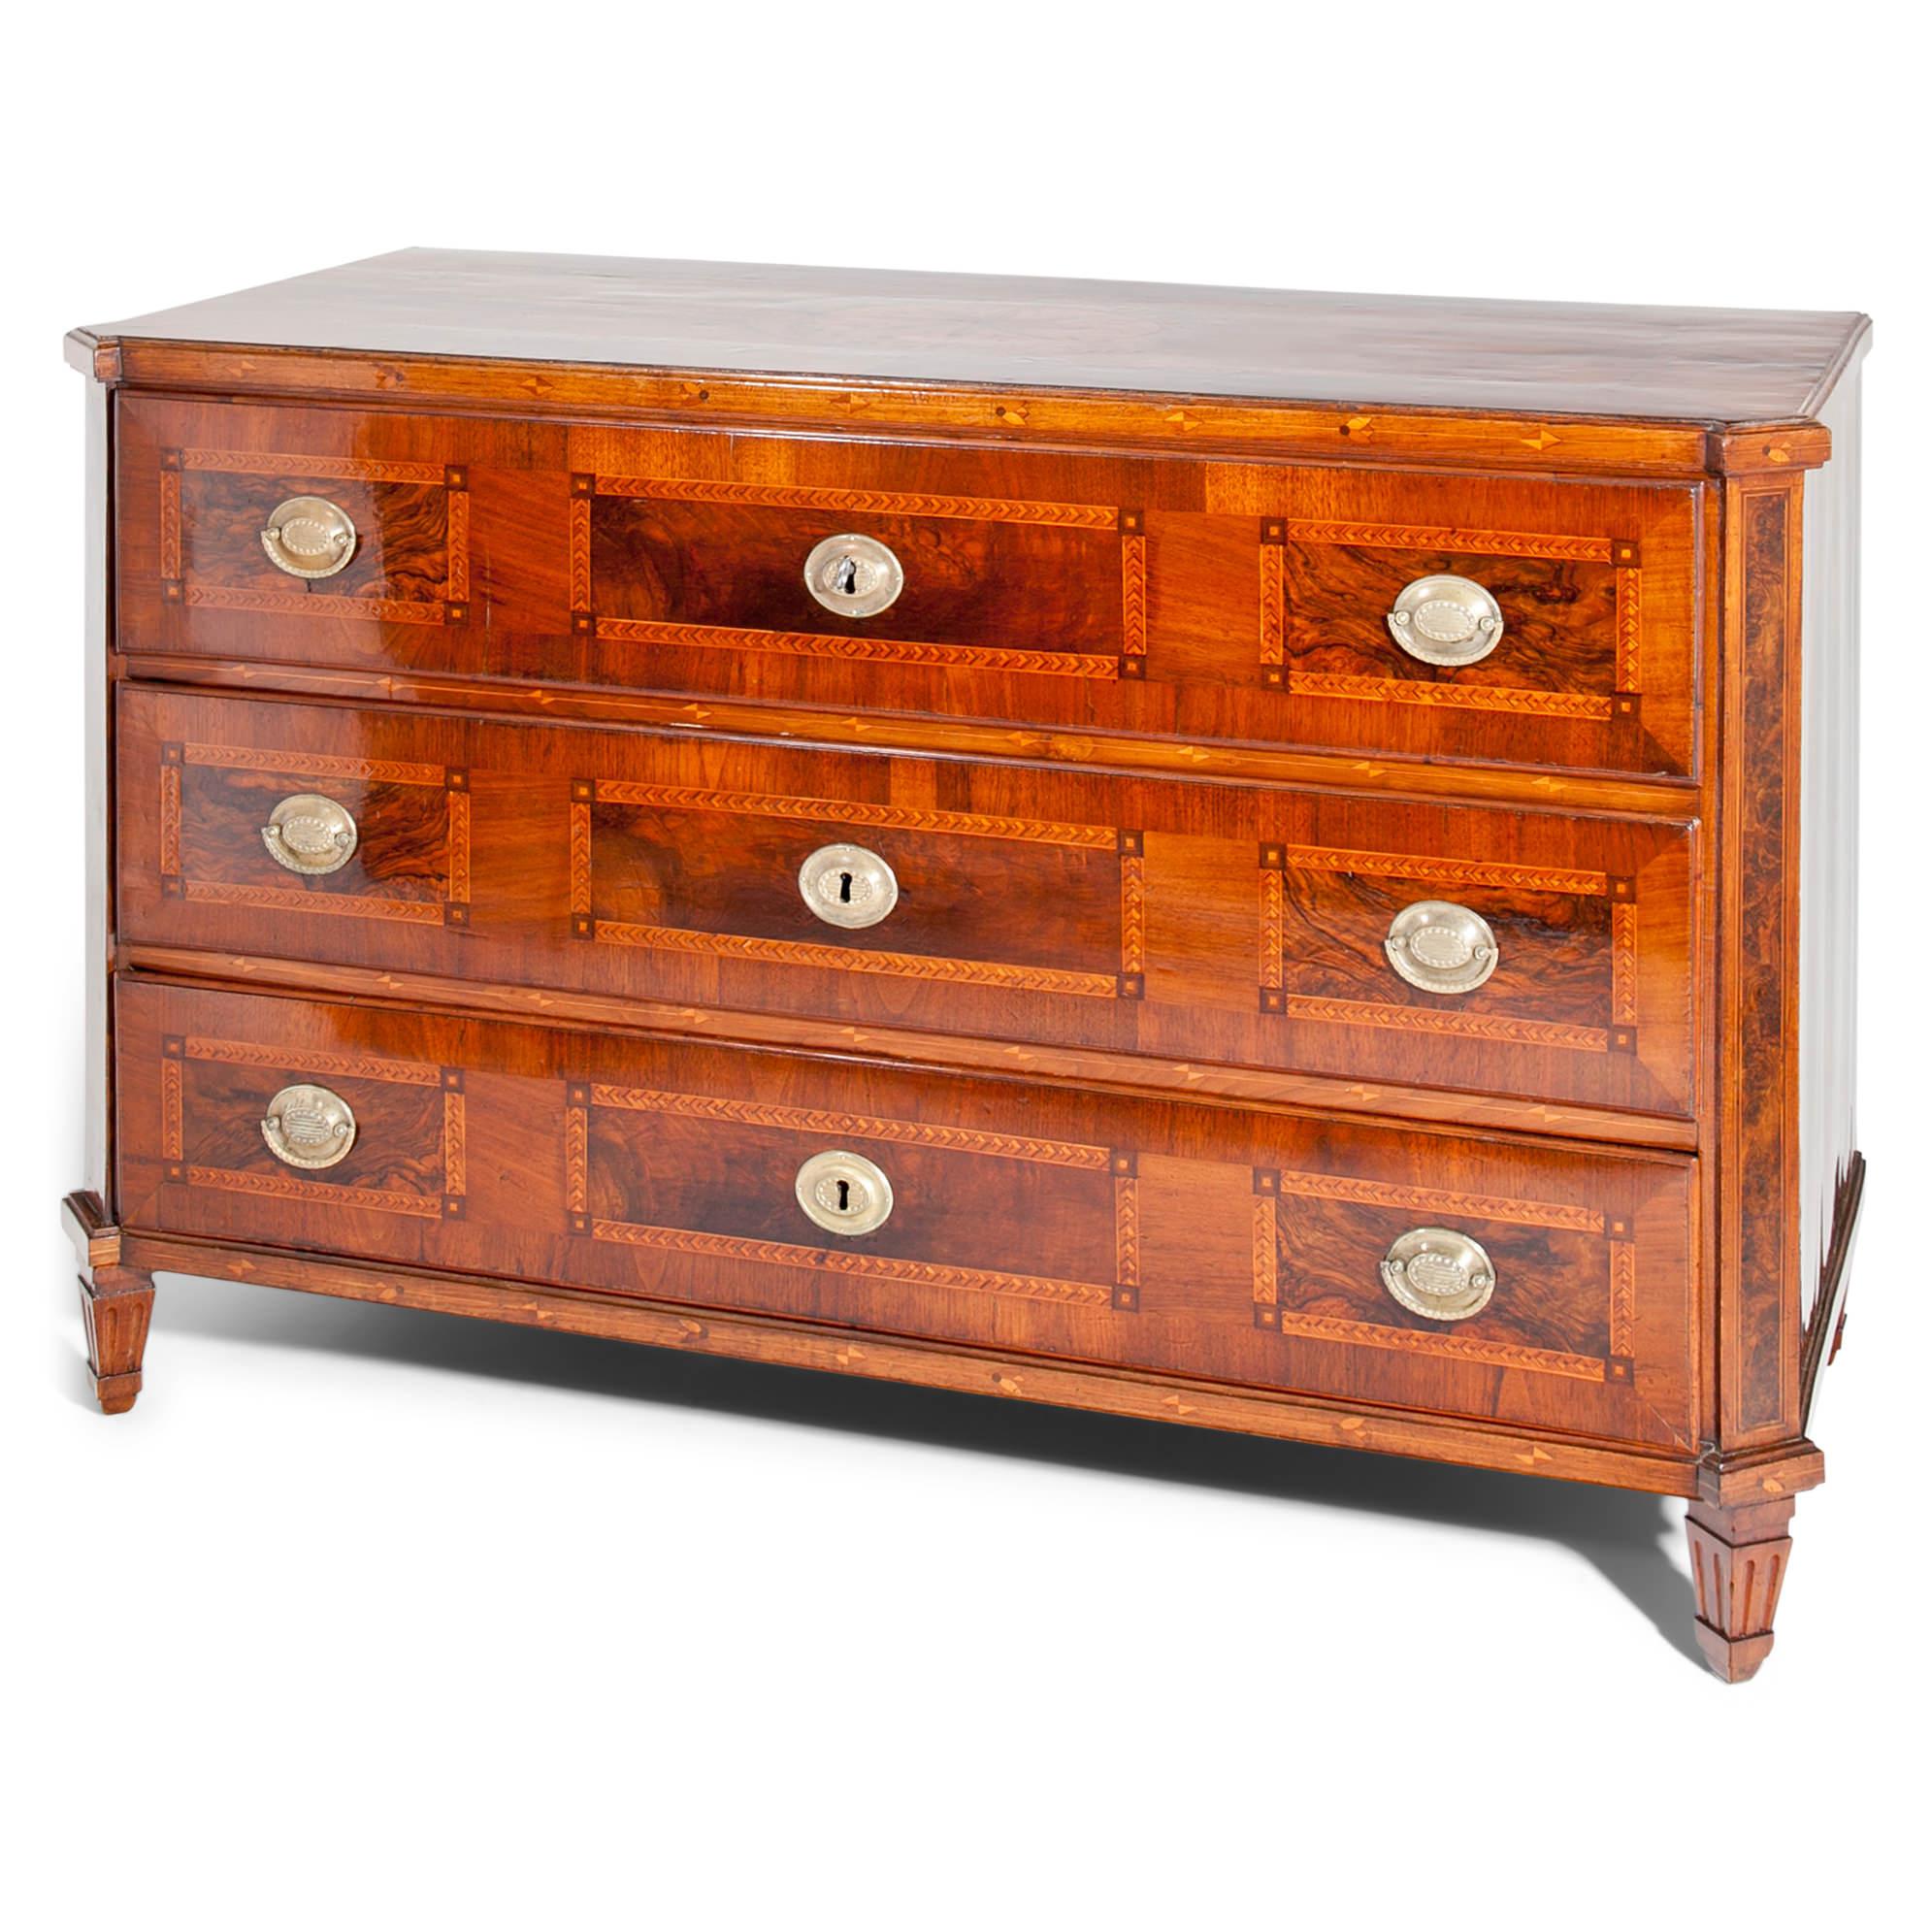 Three-drawered Louis Seize chest of drawers in walnut and burl wood veneered. The commode stands on fluted and tapered feet and has slanted corners. The top shows a beautiful flower-shaped marquetry in a medallion. The chest was professionally